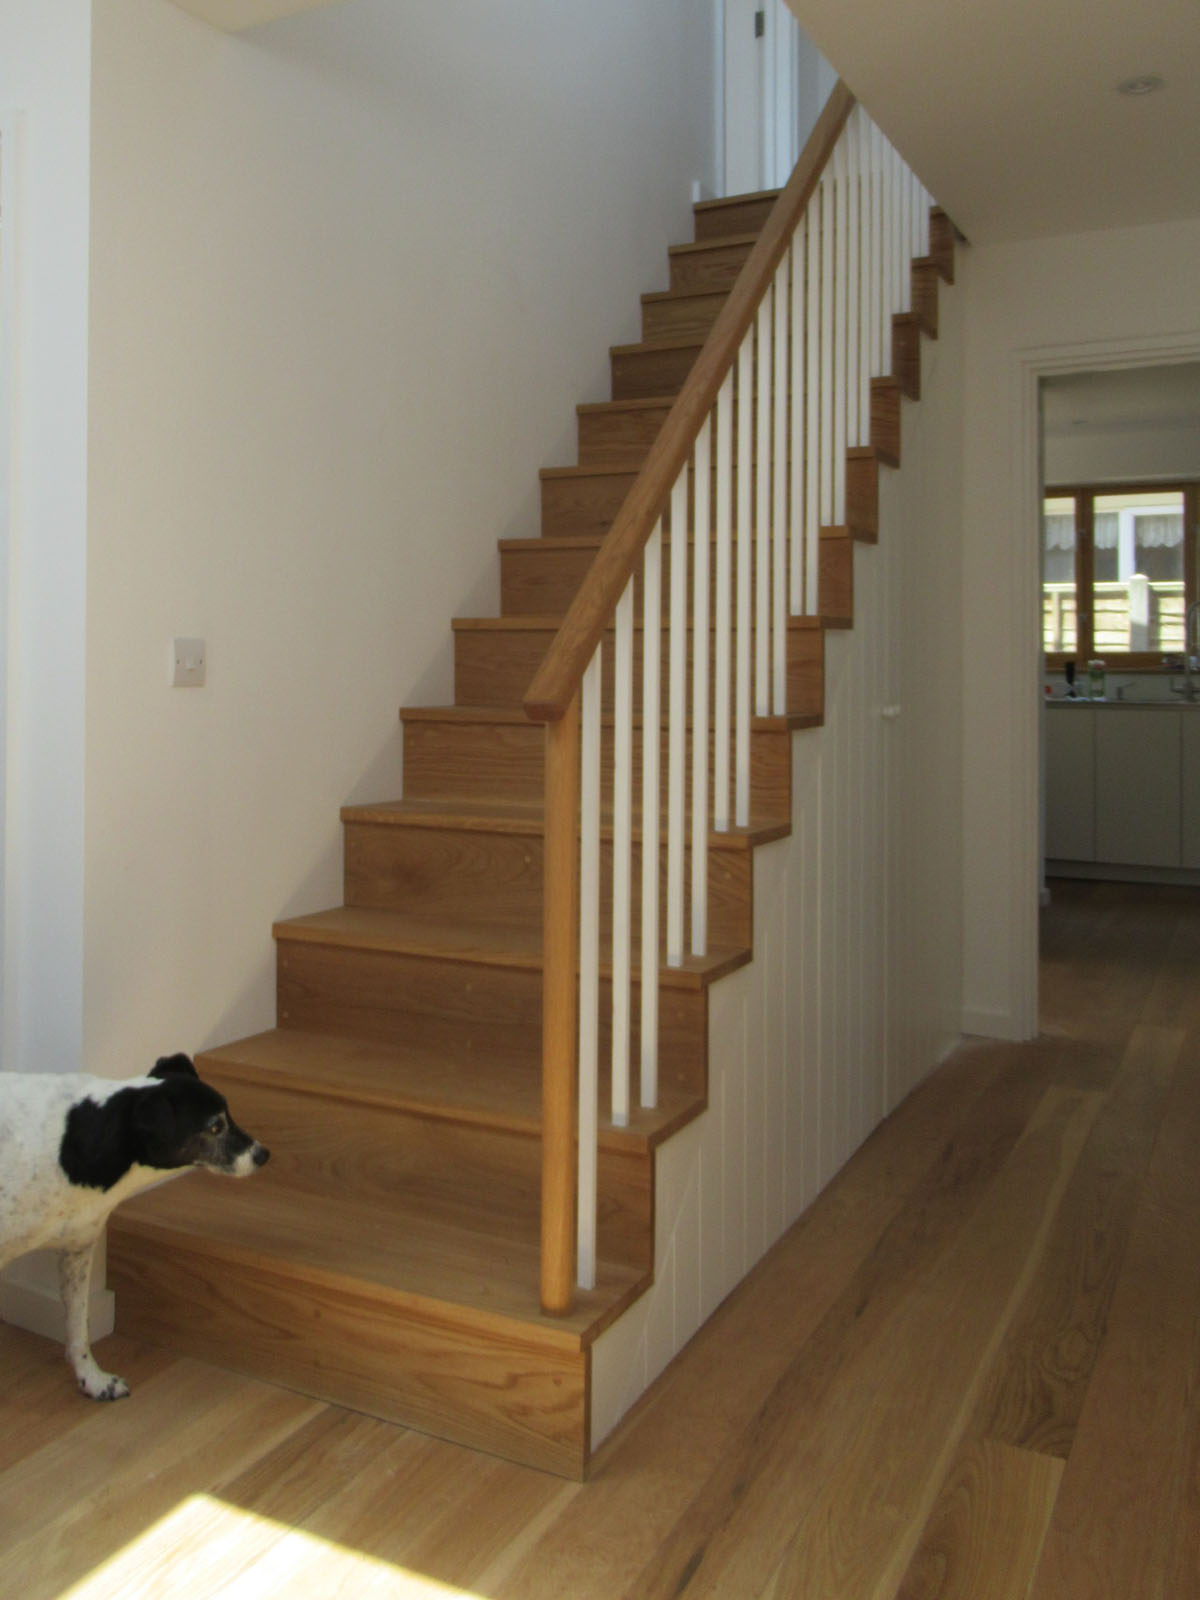 Folded oak stairs with dog